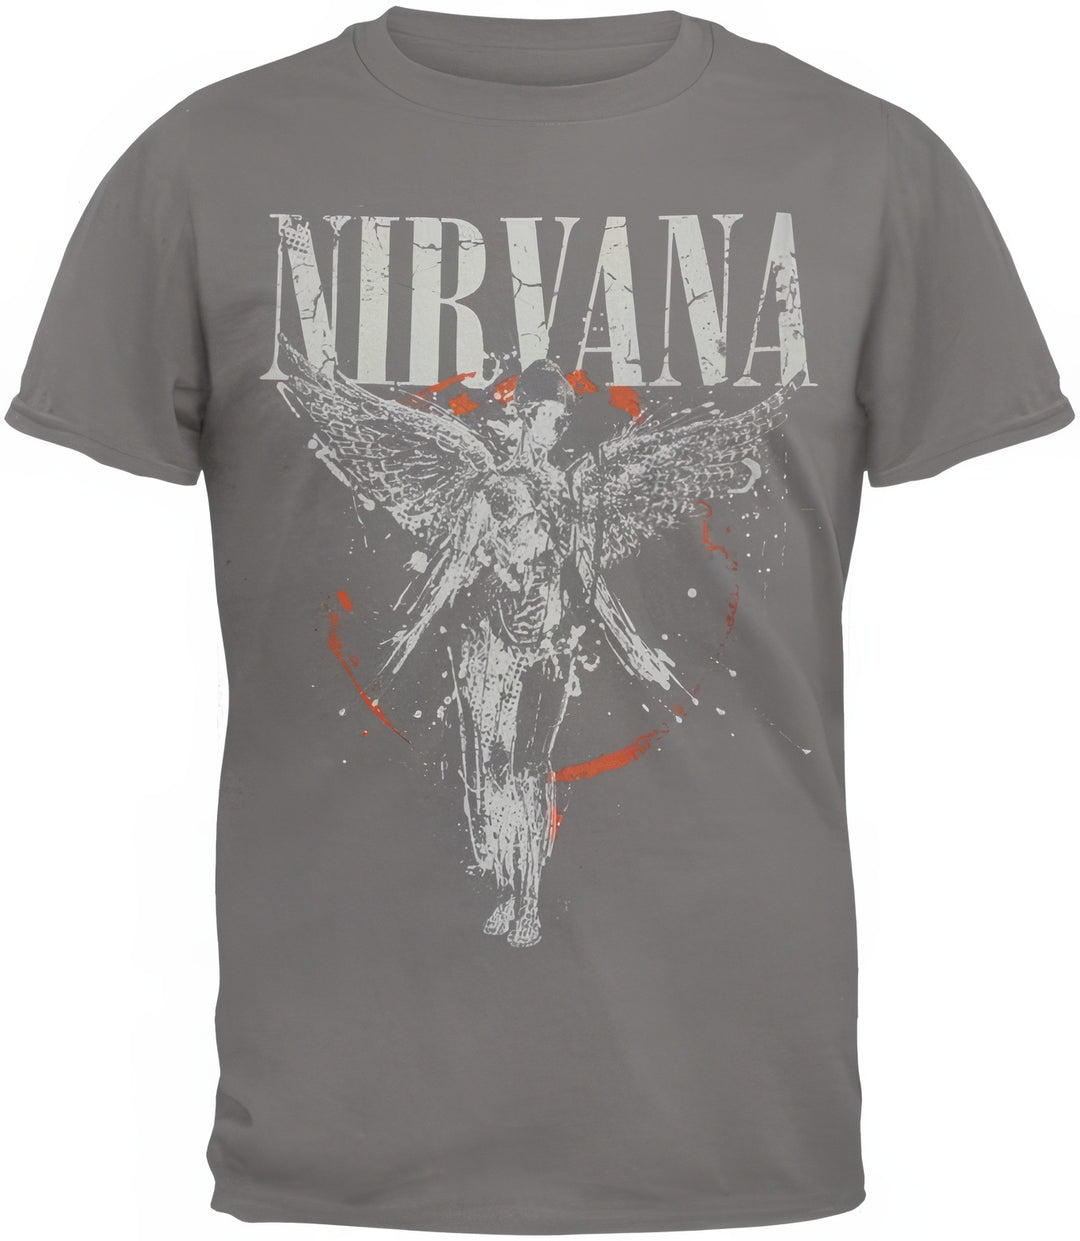 Graphic T-shirt showcasing Nirvana's 'In Utero' iconic angelic figure with wings found on the album cover.  A powerful representation of the legendary 'In Utero' album on a grey tee.